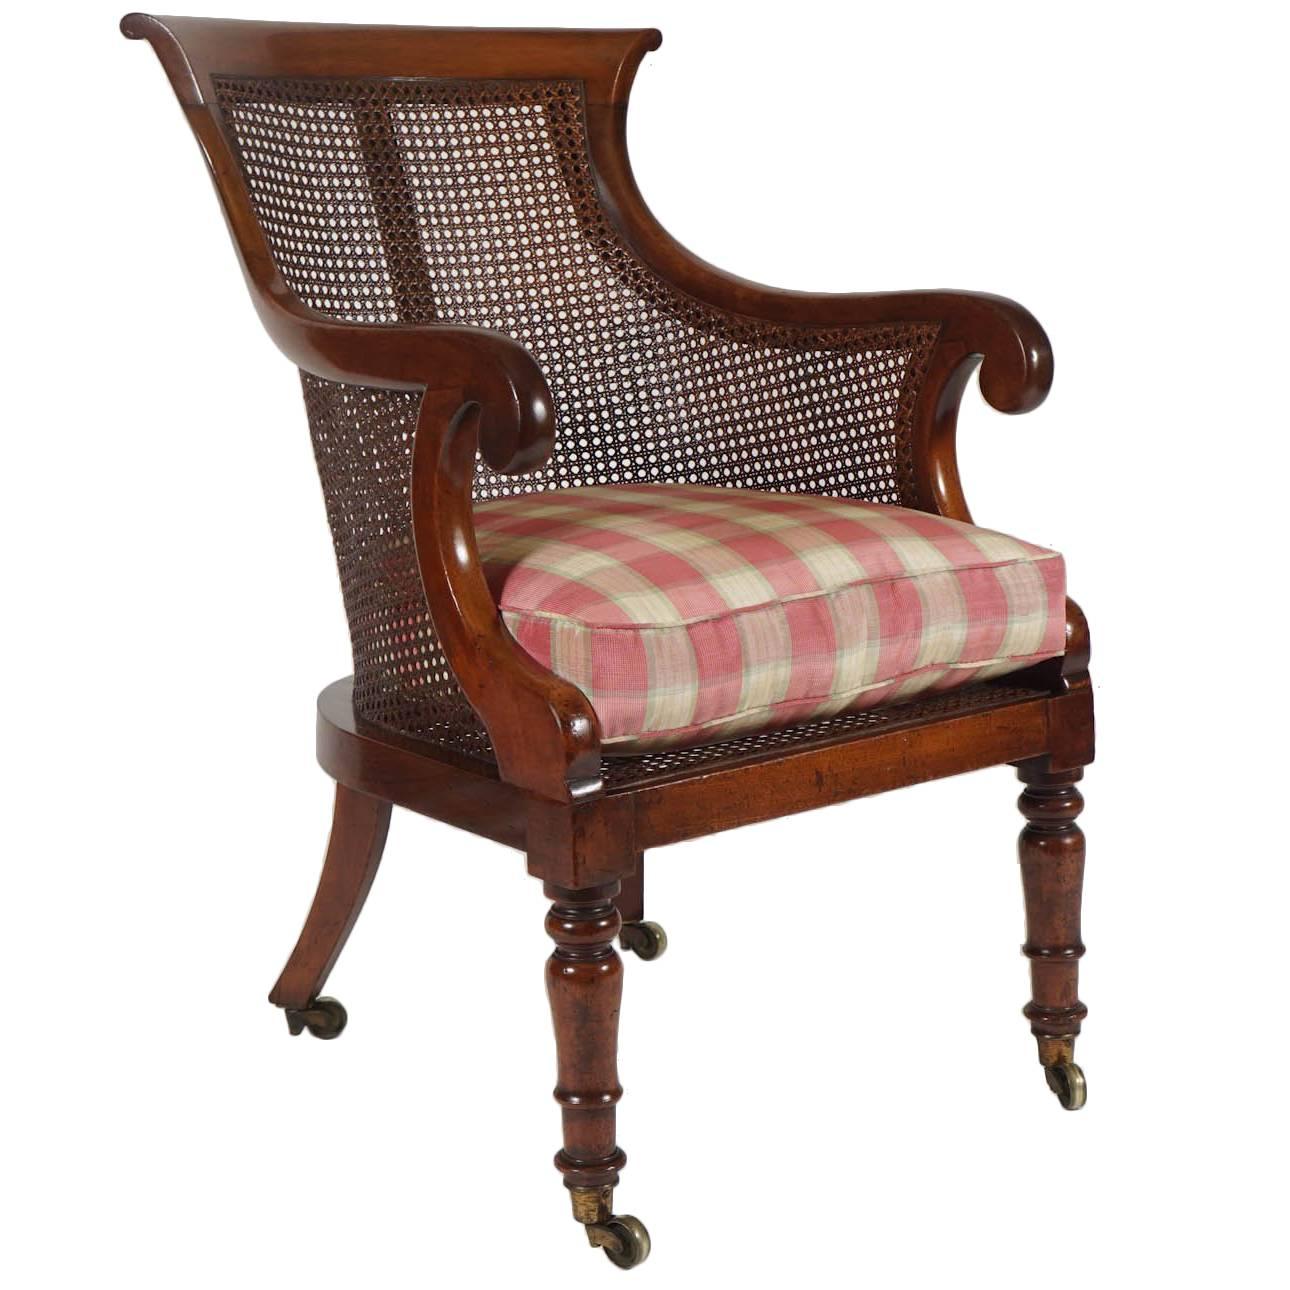 English Regency Period Caned Mahogany Armchair or Bergere, circa 1830